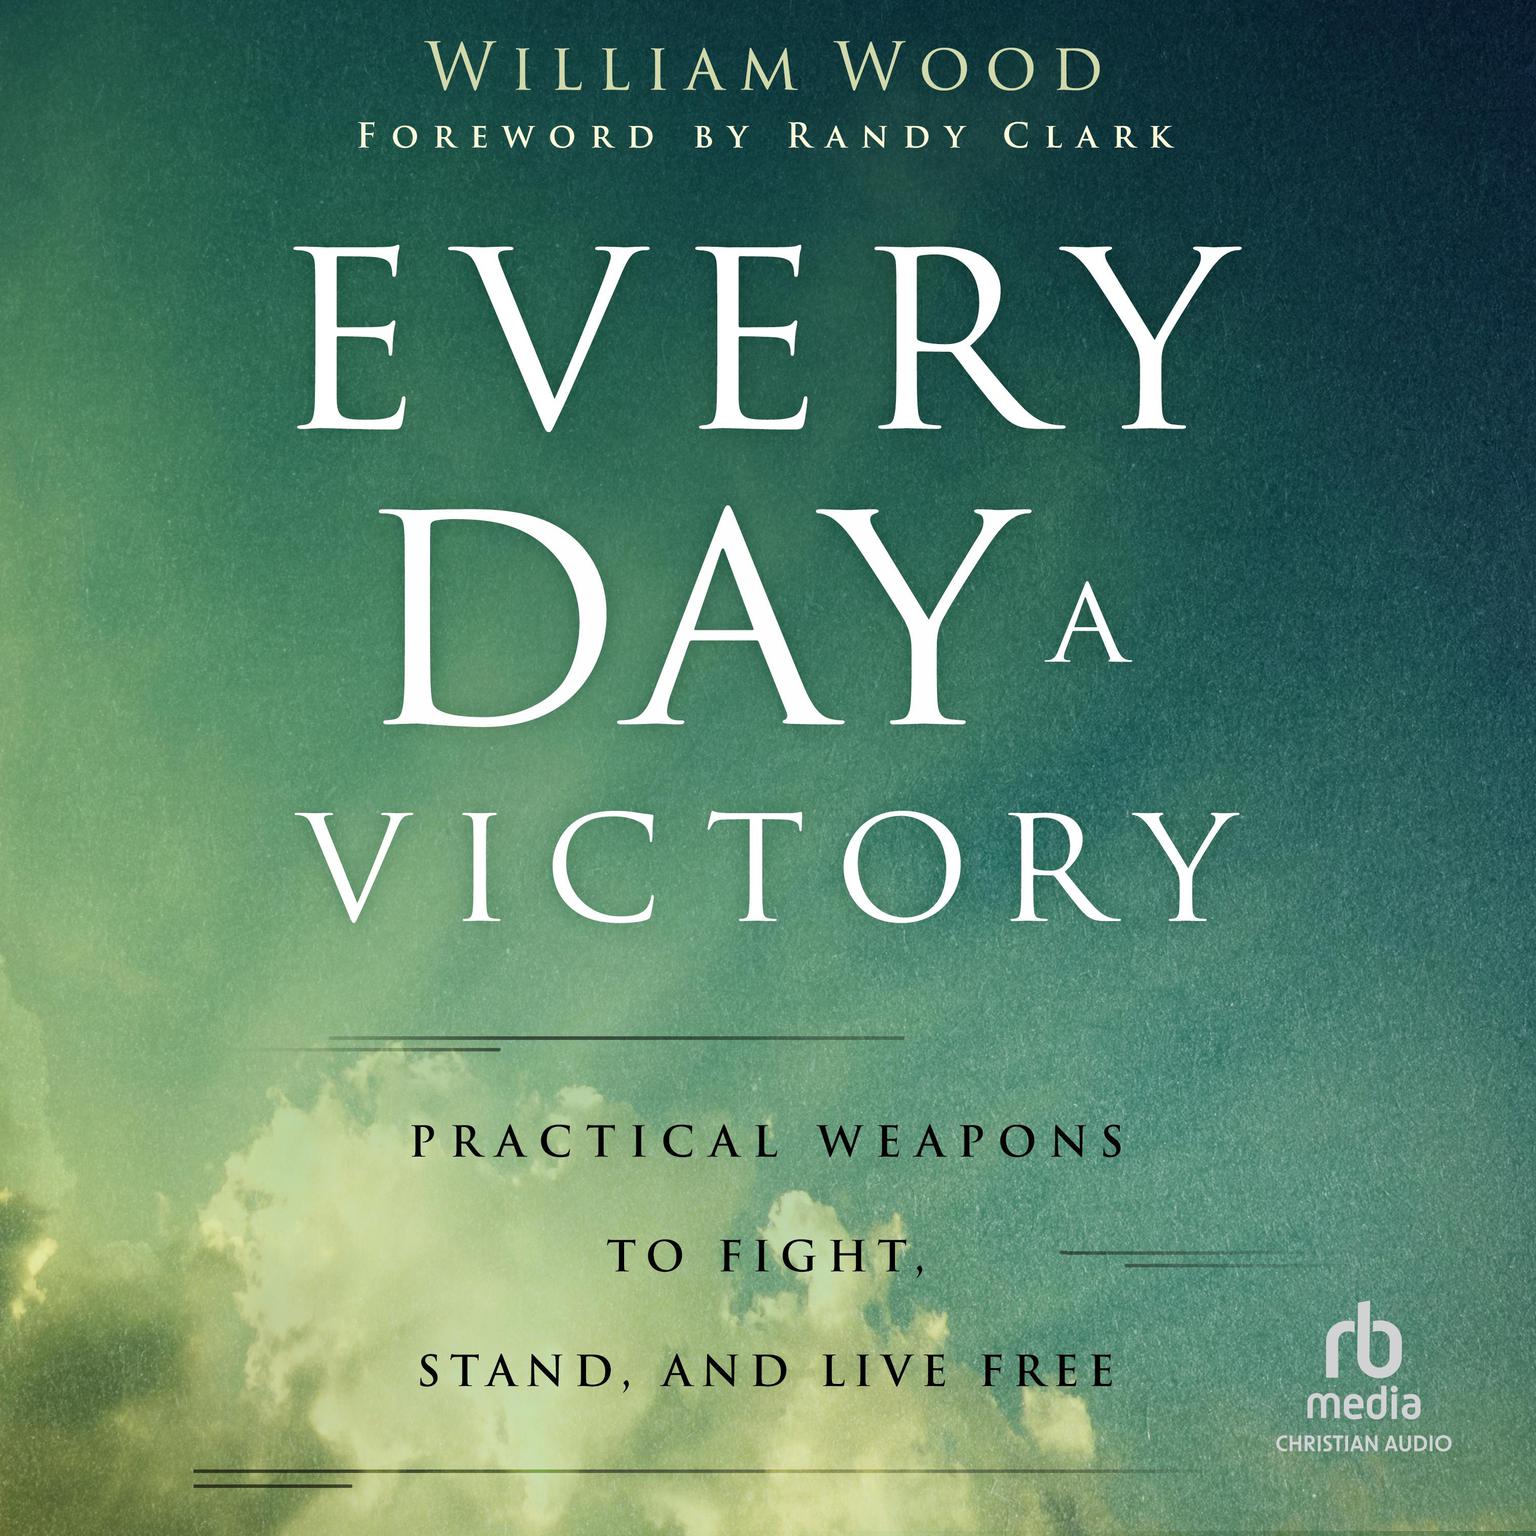 Every Day a Victory: Practical Weapons to Fight, Stand, and Live Free Audiobook, by William Wood